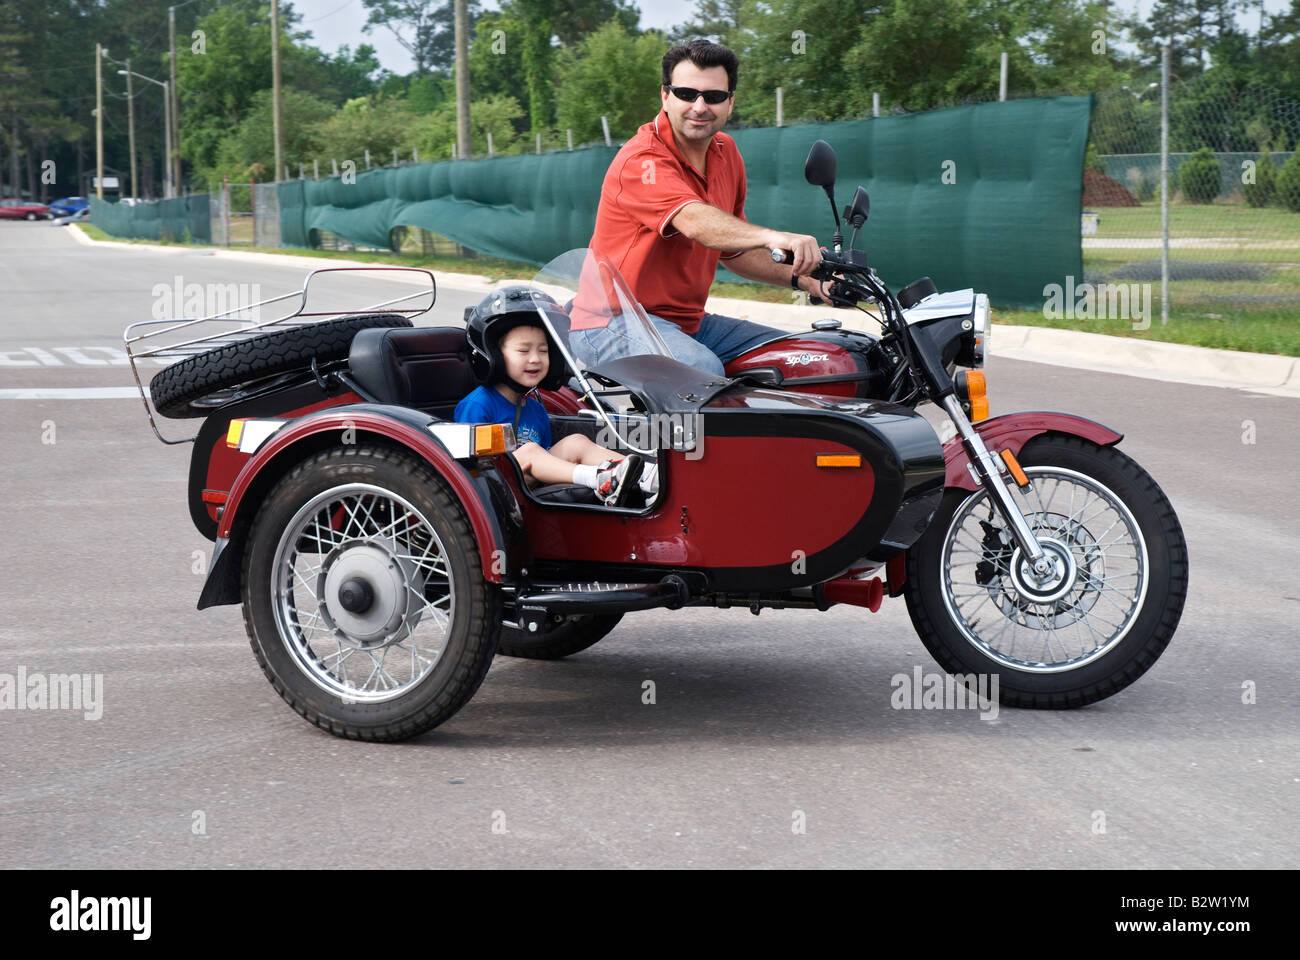 man on motorcycle with child in sidecar Gainesville Florida URAL YPAN motorcycle from Russia Stock Photo